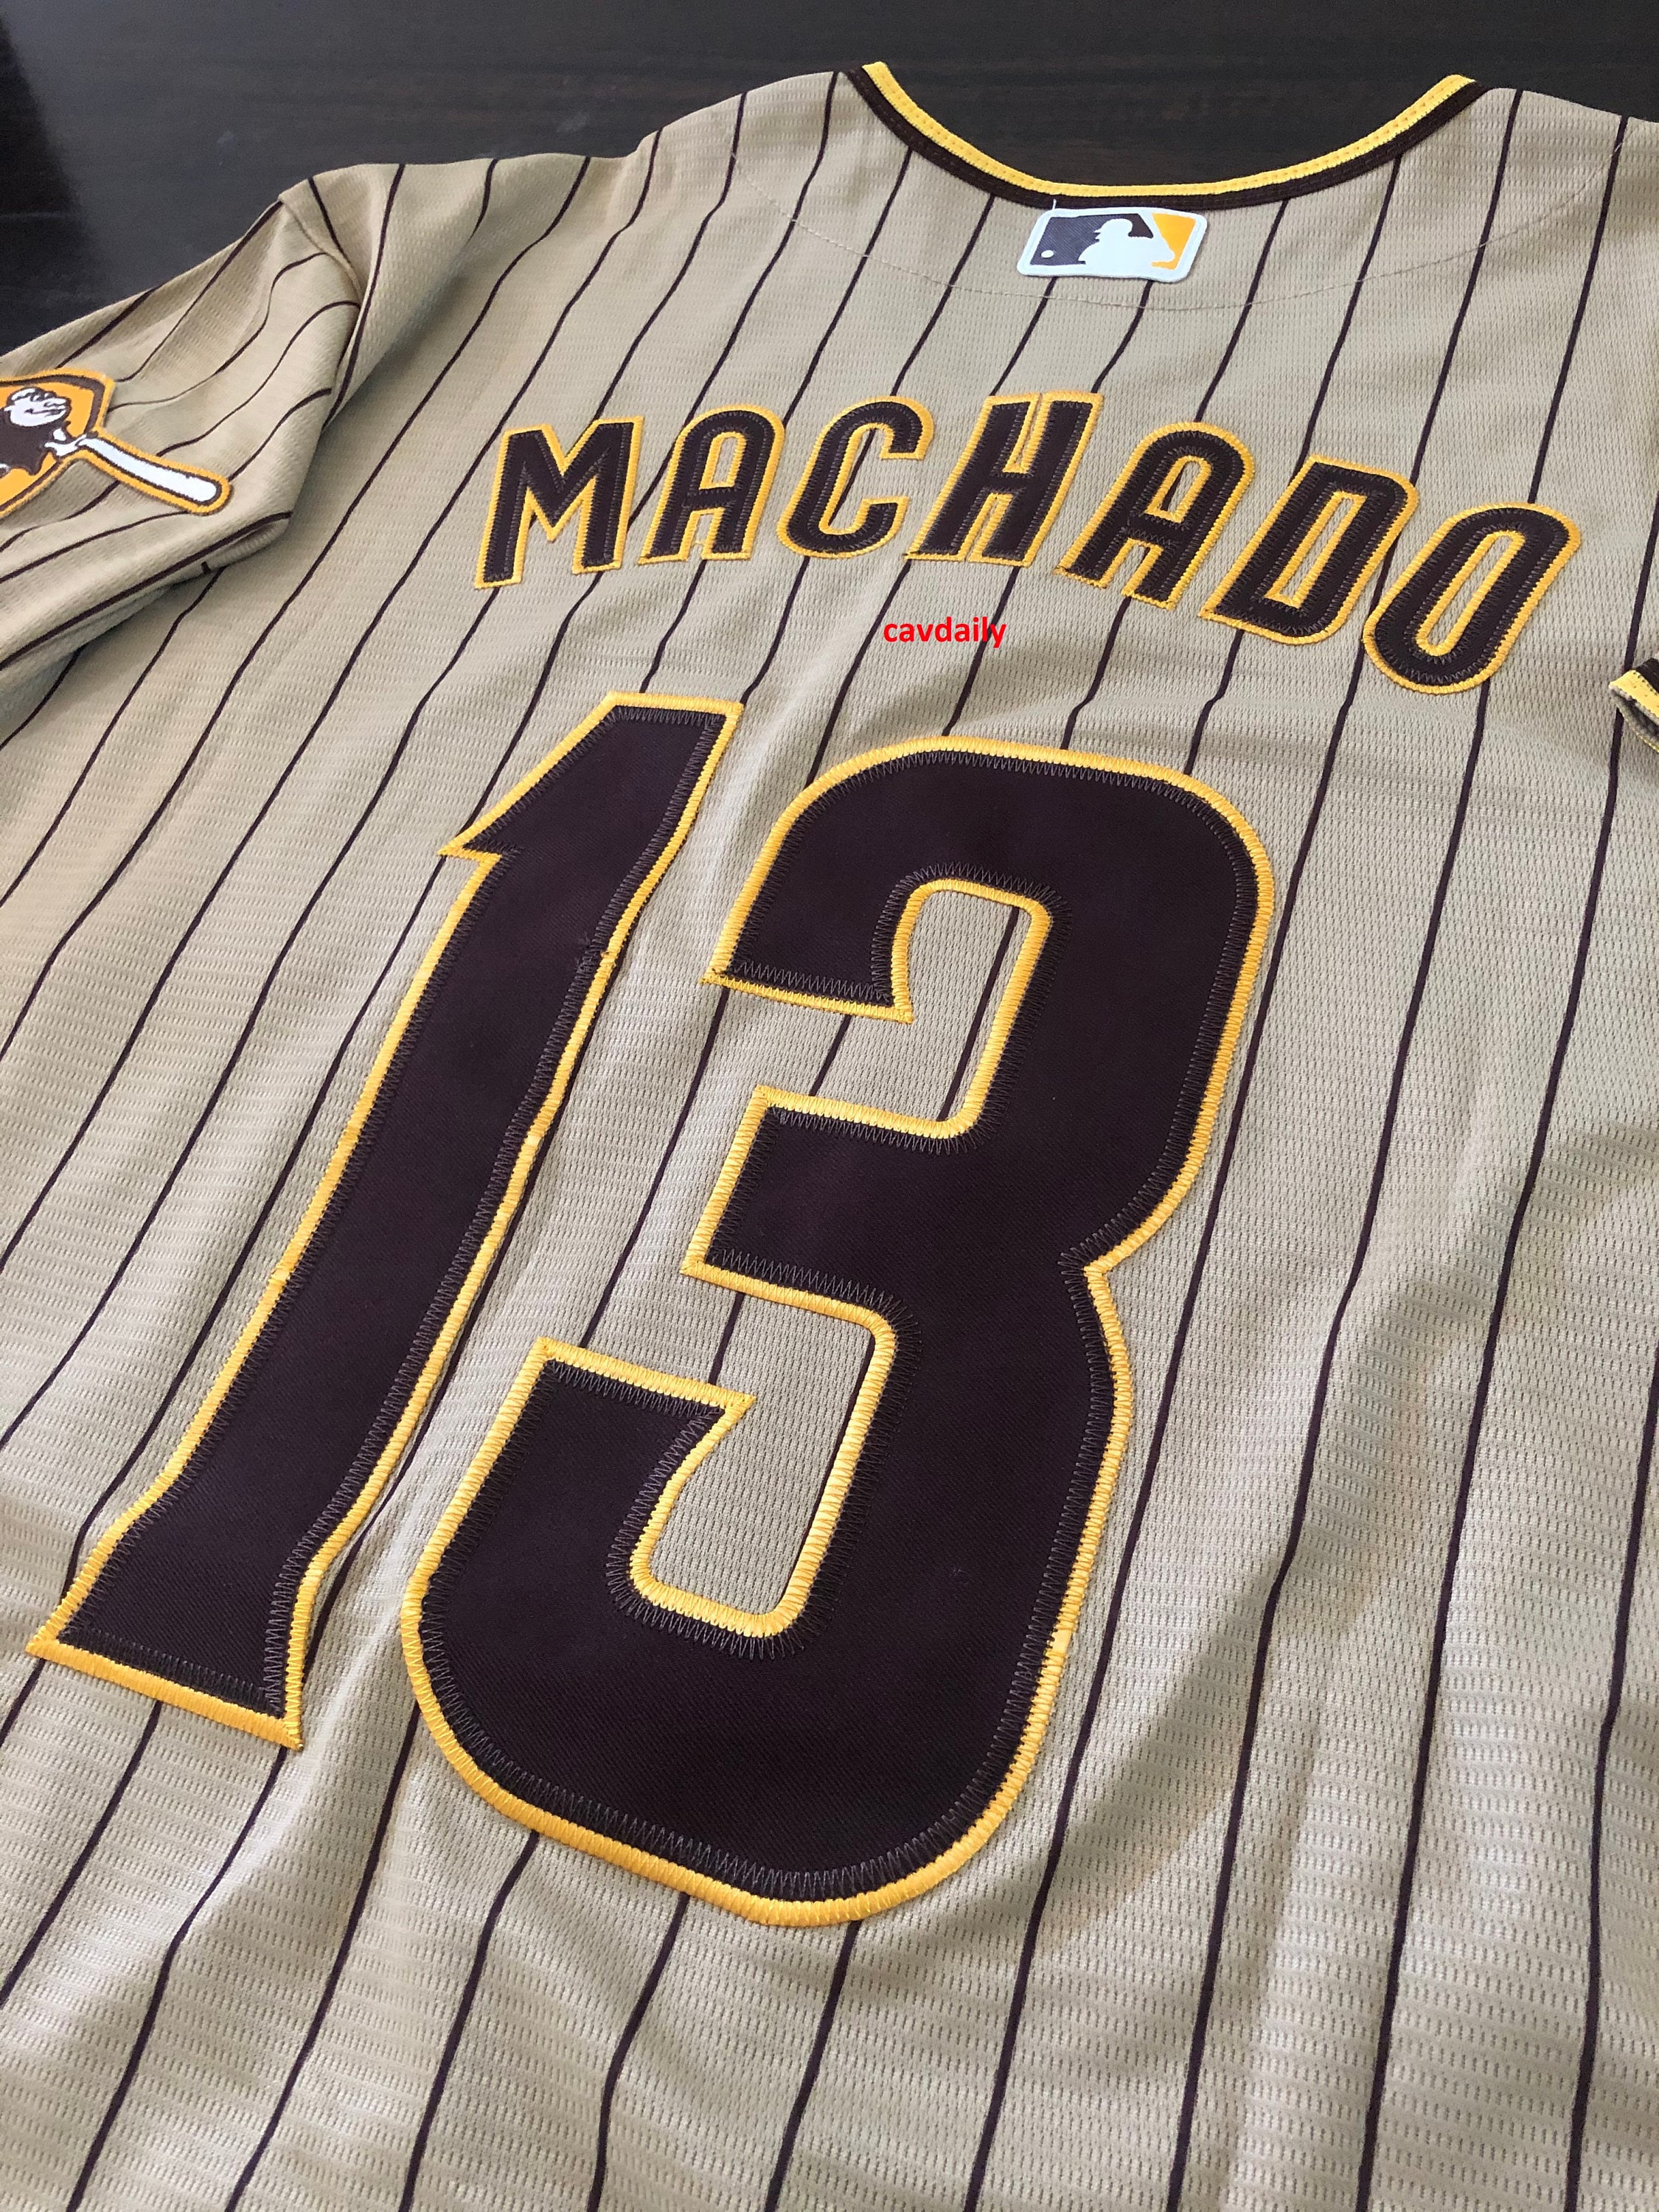 Buy New 2023 Manny Machado San Diego Padres Stitched Jersey Tan Online in  India 